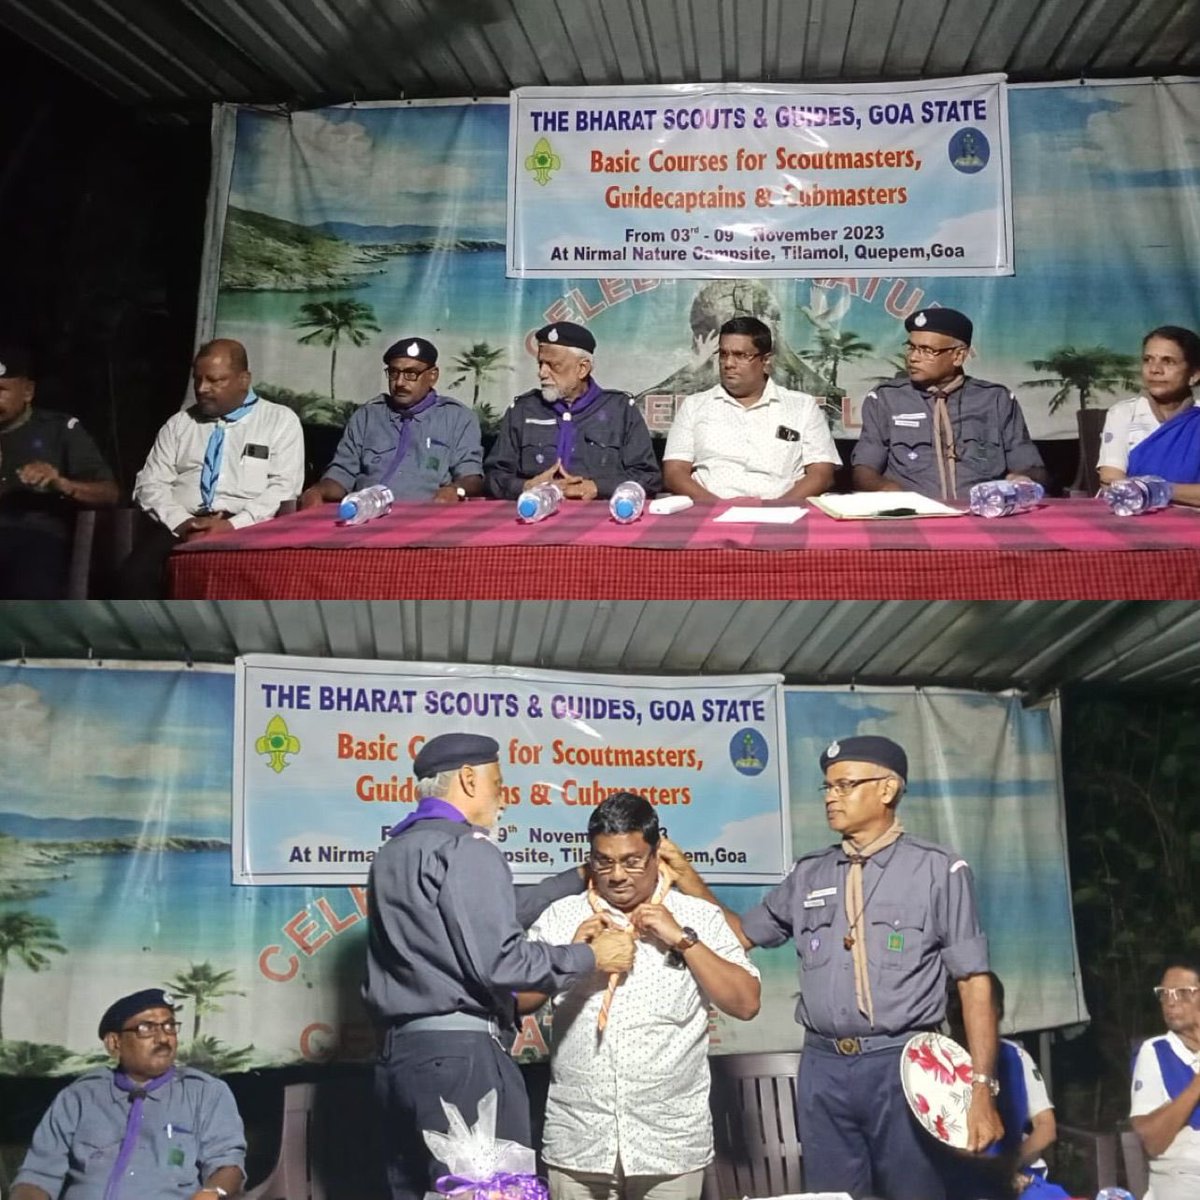 Honored to be felicitated by The Goa-Bharat Scouts & Guides, during the Basic Course for Scoutmasters, Guidecaptains & Cubmasters. Scouts & Guides a voluntary movement with its motto ‘Be Prepared' for the service of mankind and protection of nature. #AamAadmiParty